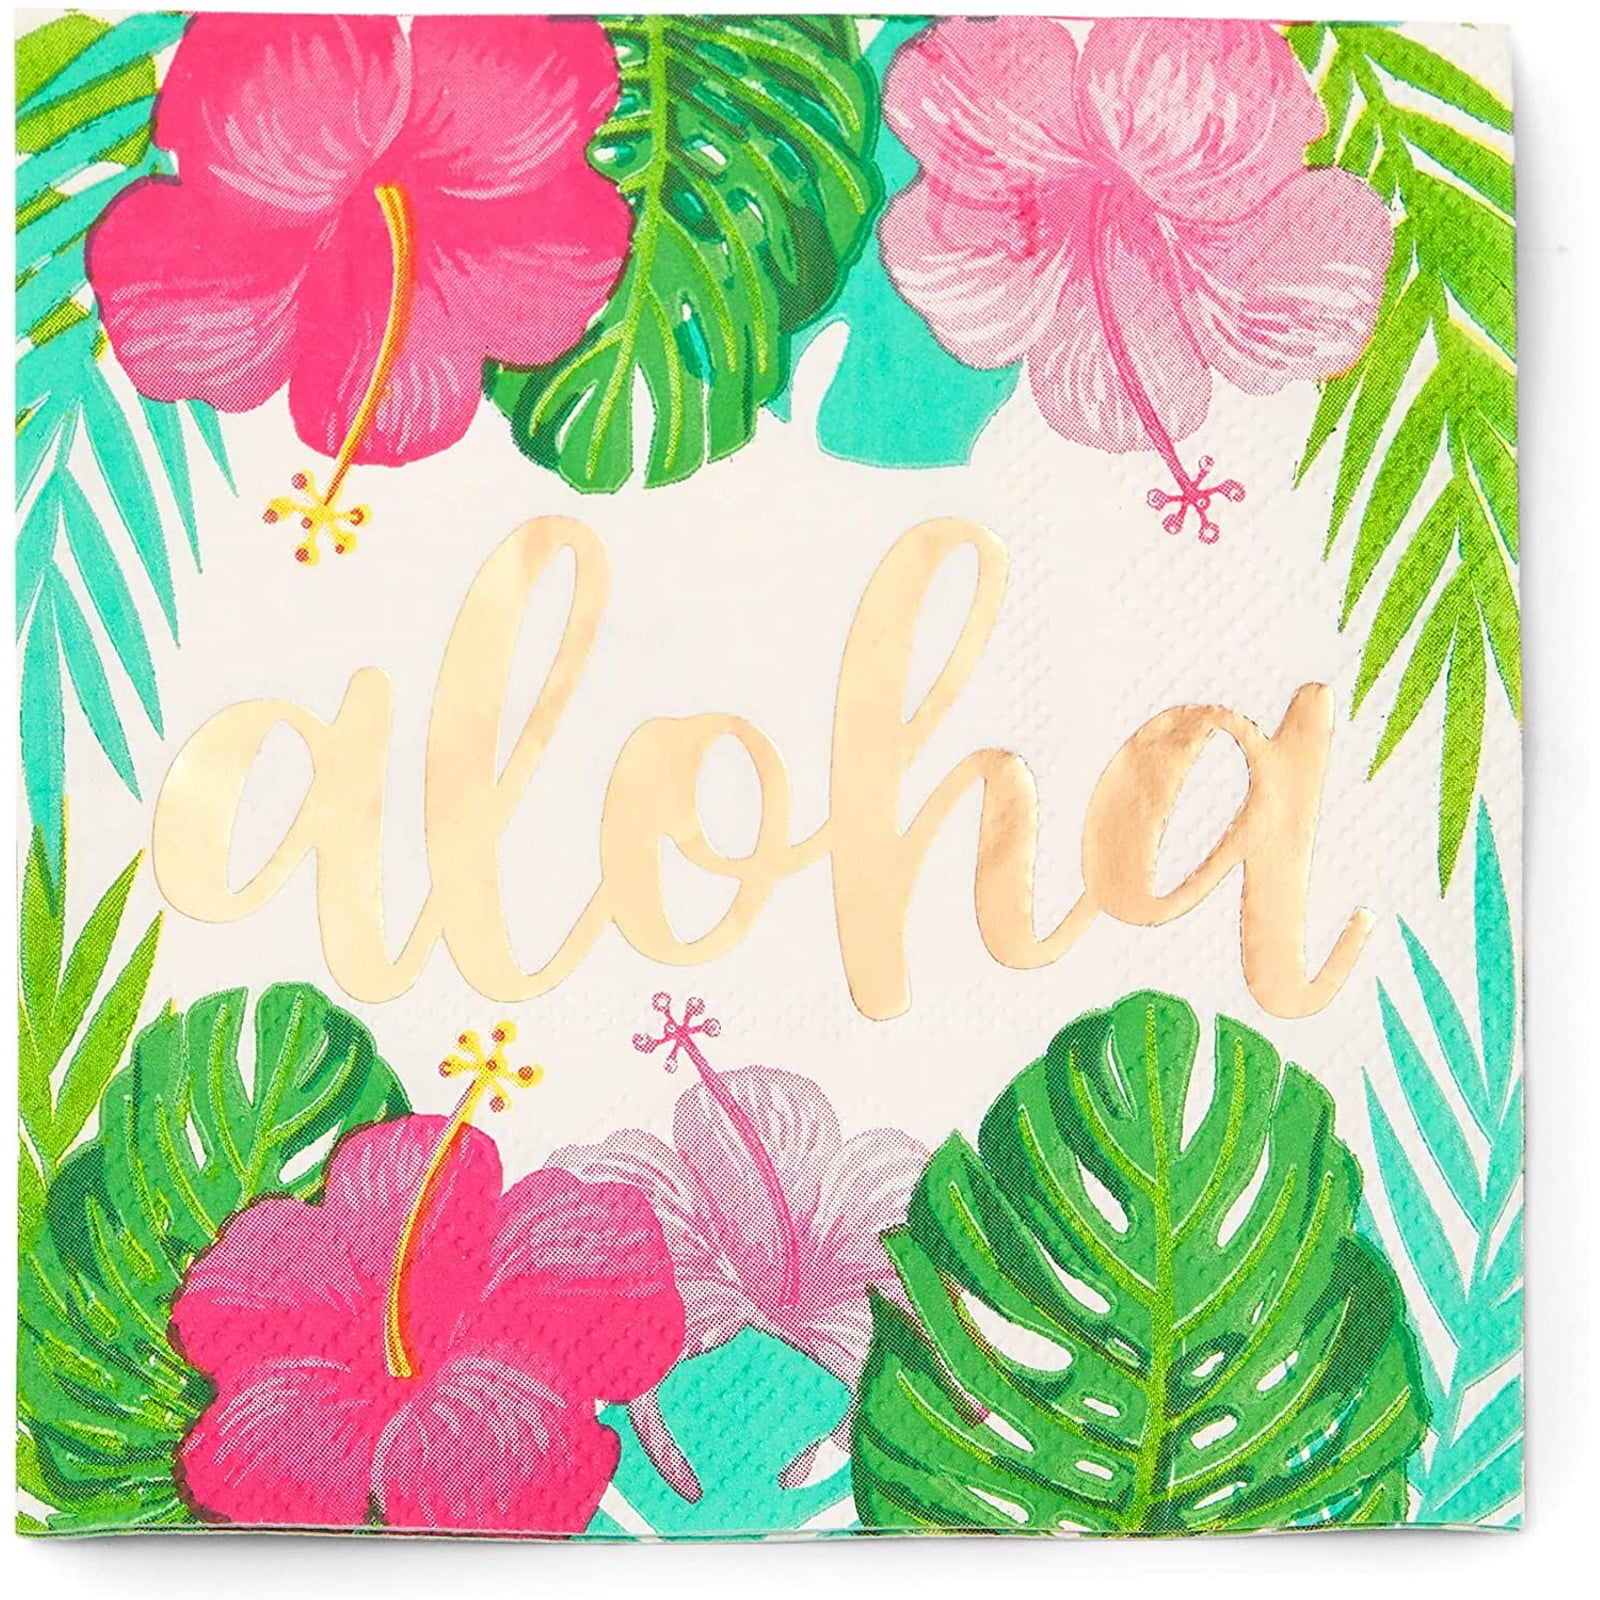 Creative Converting Aloha 16 Ct Lunch Napkins Summer Luau Party Pineapple Hibiscus